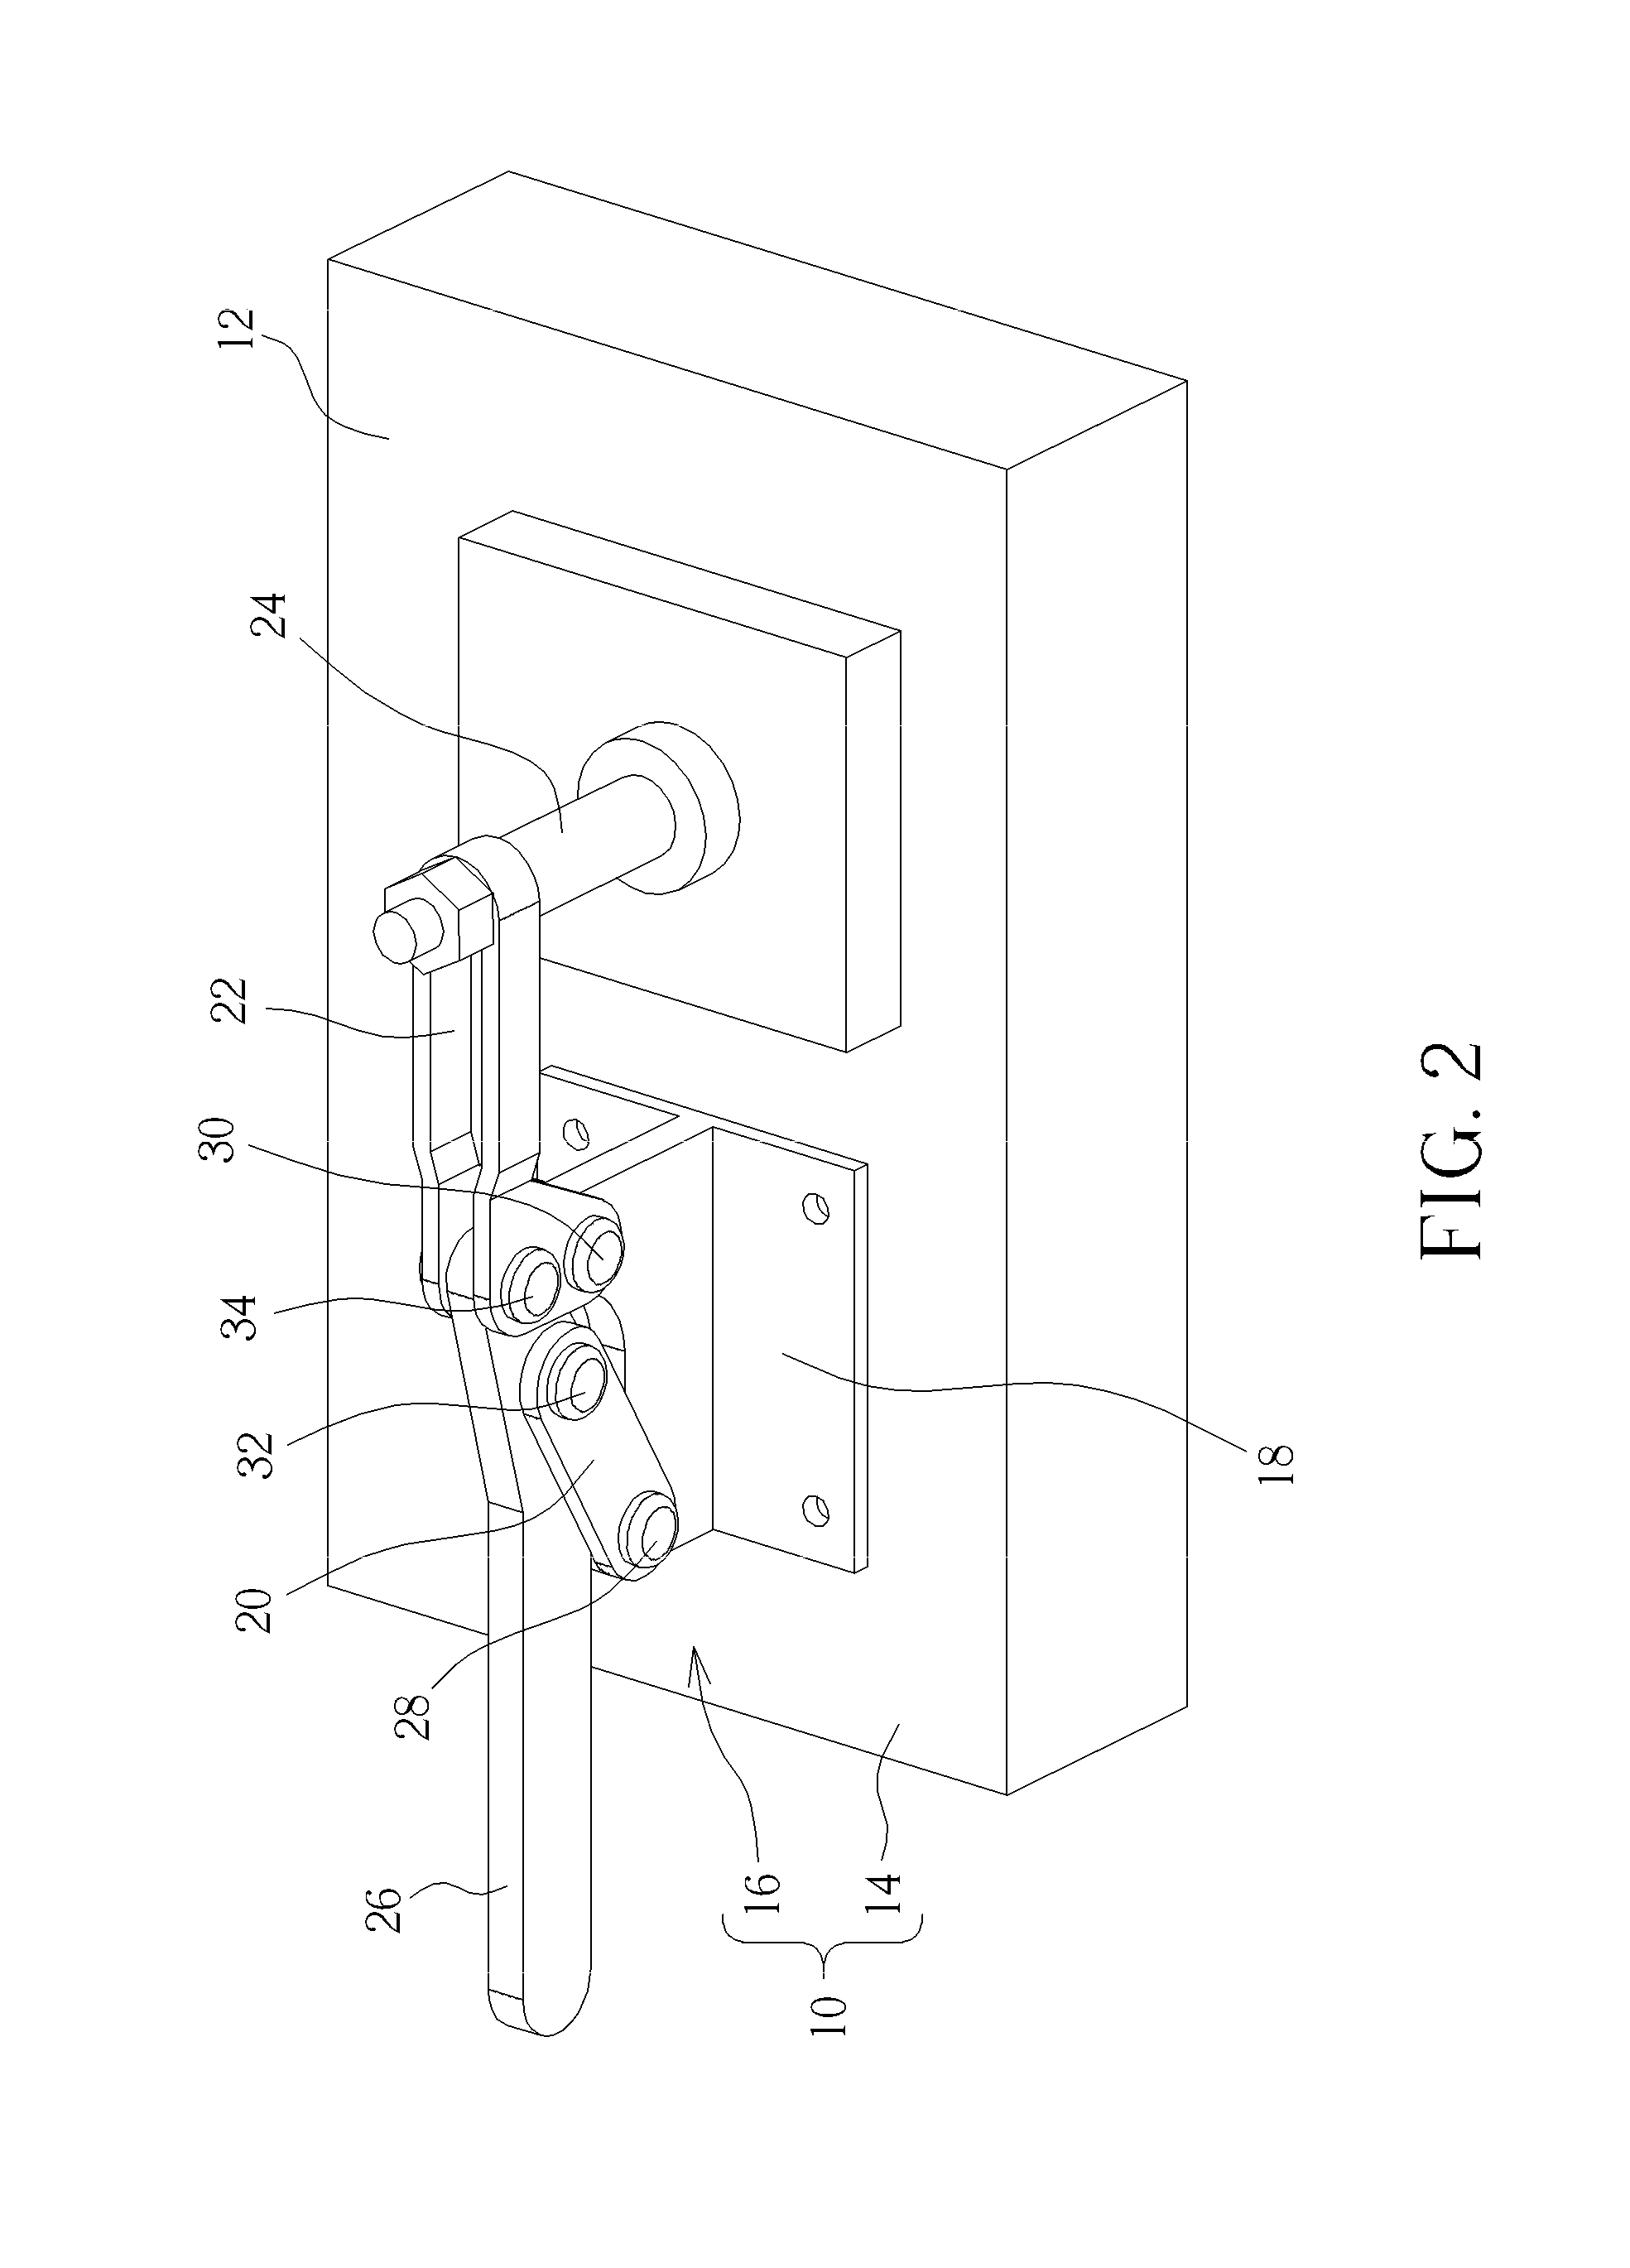 Clamp fixture and related clamp apparatus